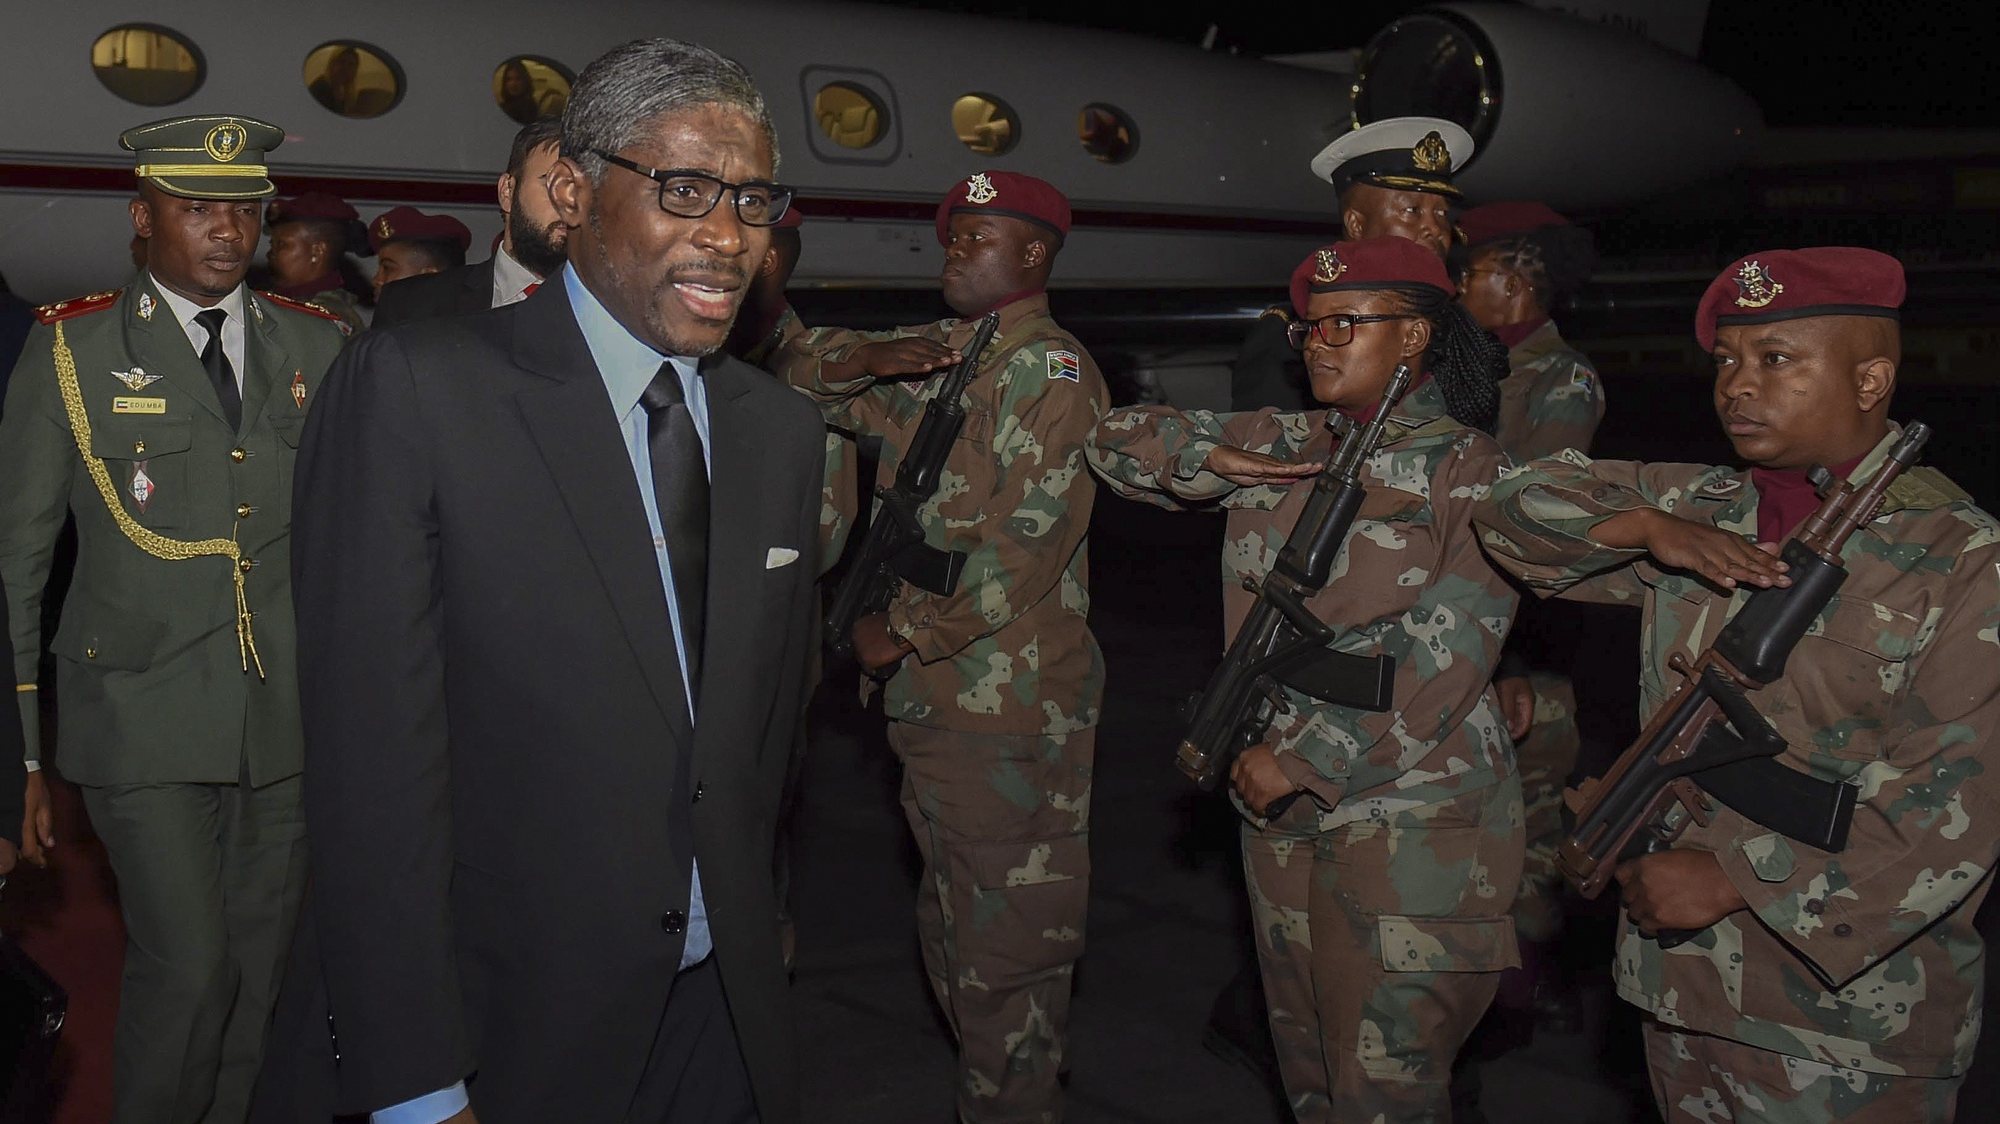 epa07598536 A handout photo made available by the South African government&#039;s Department of International Relations and Cooperationâ€™s (DIRCO) shows Equatorial Guinea Vice-President Teodoro Nguema Obiang (L) arriving at Lanseria International Airport in Johannesburg, South Africa 24 May 2019.Angolan President Joao Lourenco is in South Africa to attend the inauguration ceremony for South African president Cyril Ramaphosa at Loftus Versveld Stadium in Pretoria on 25 May 2019.  EPA/Katlholo Maifadi/DIRCO/RSA /HANDO  HANDOUT EDITORIAL USE ONLY/NO SALES